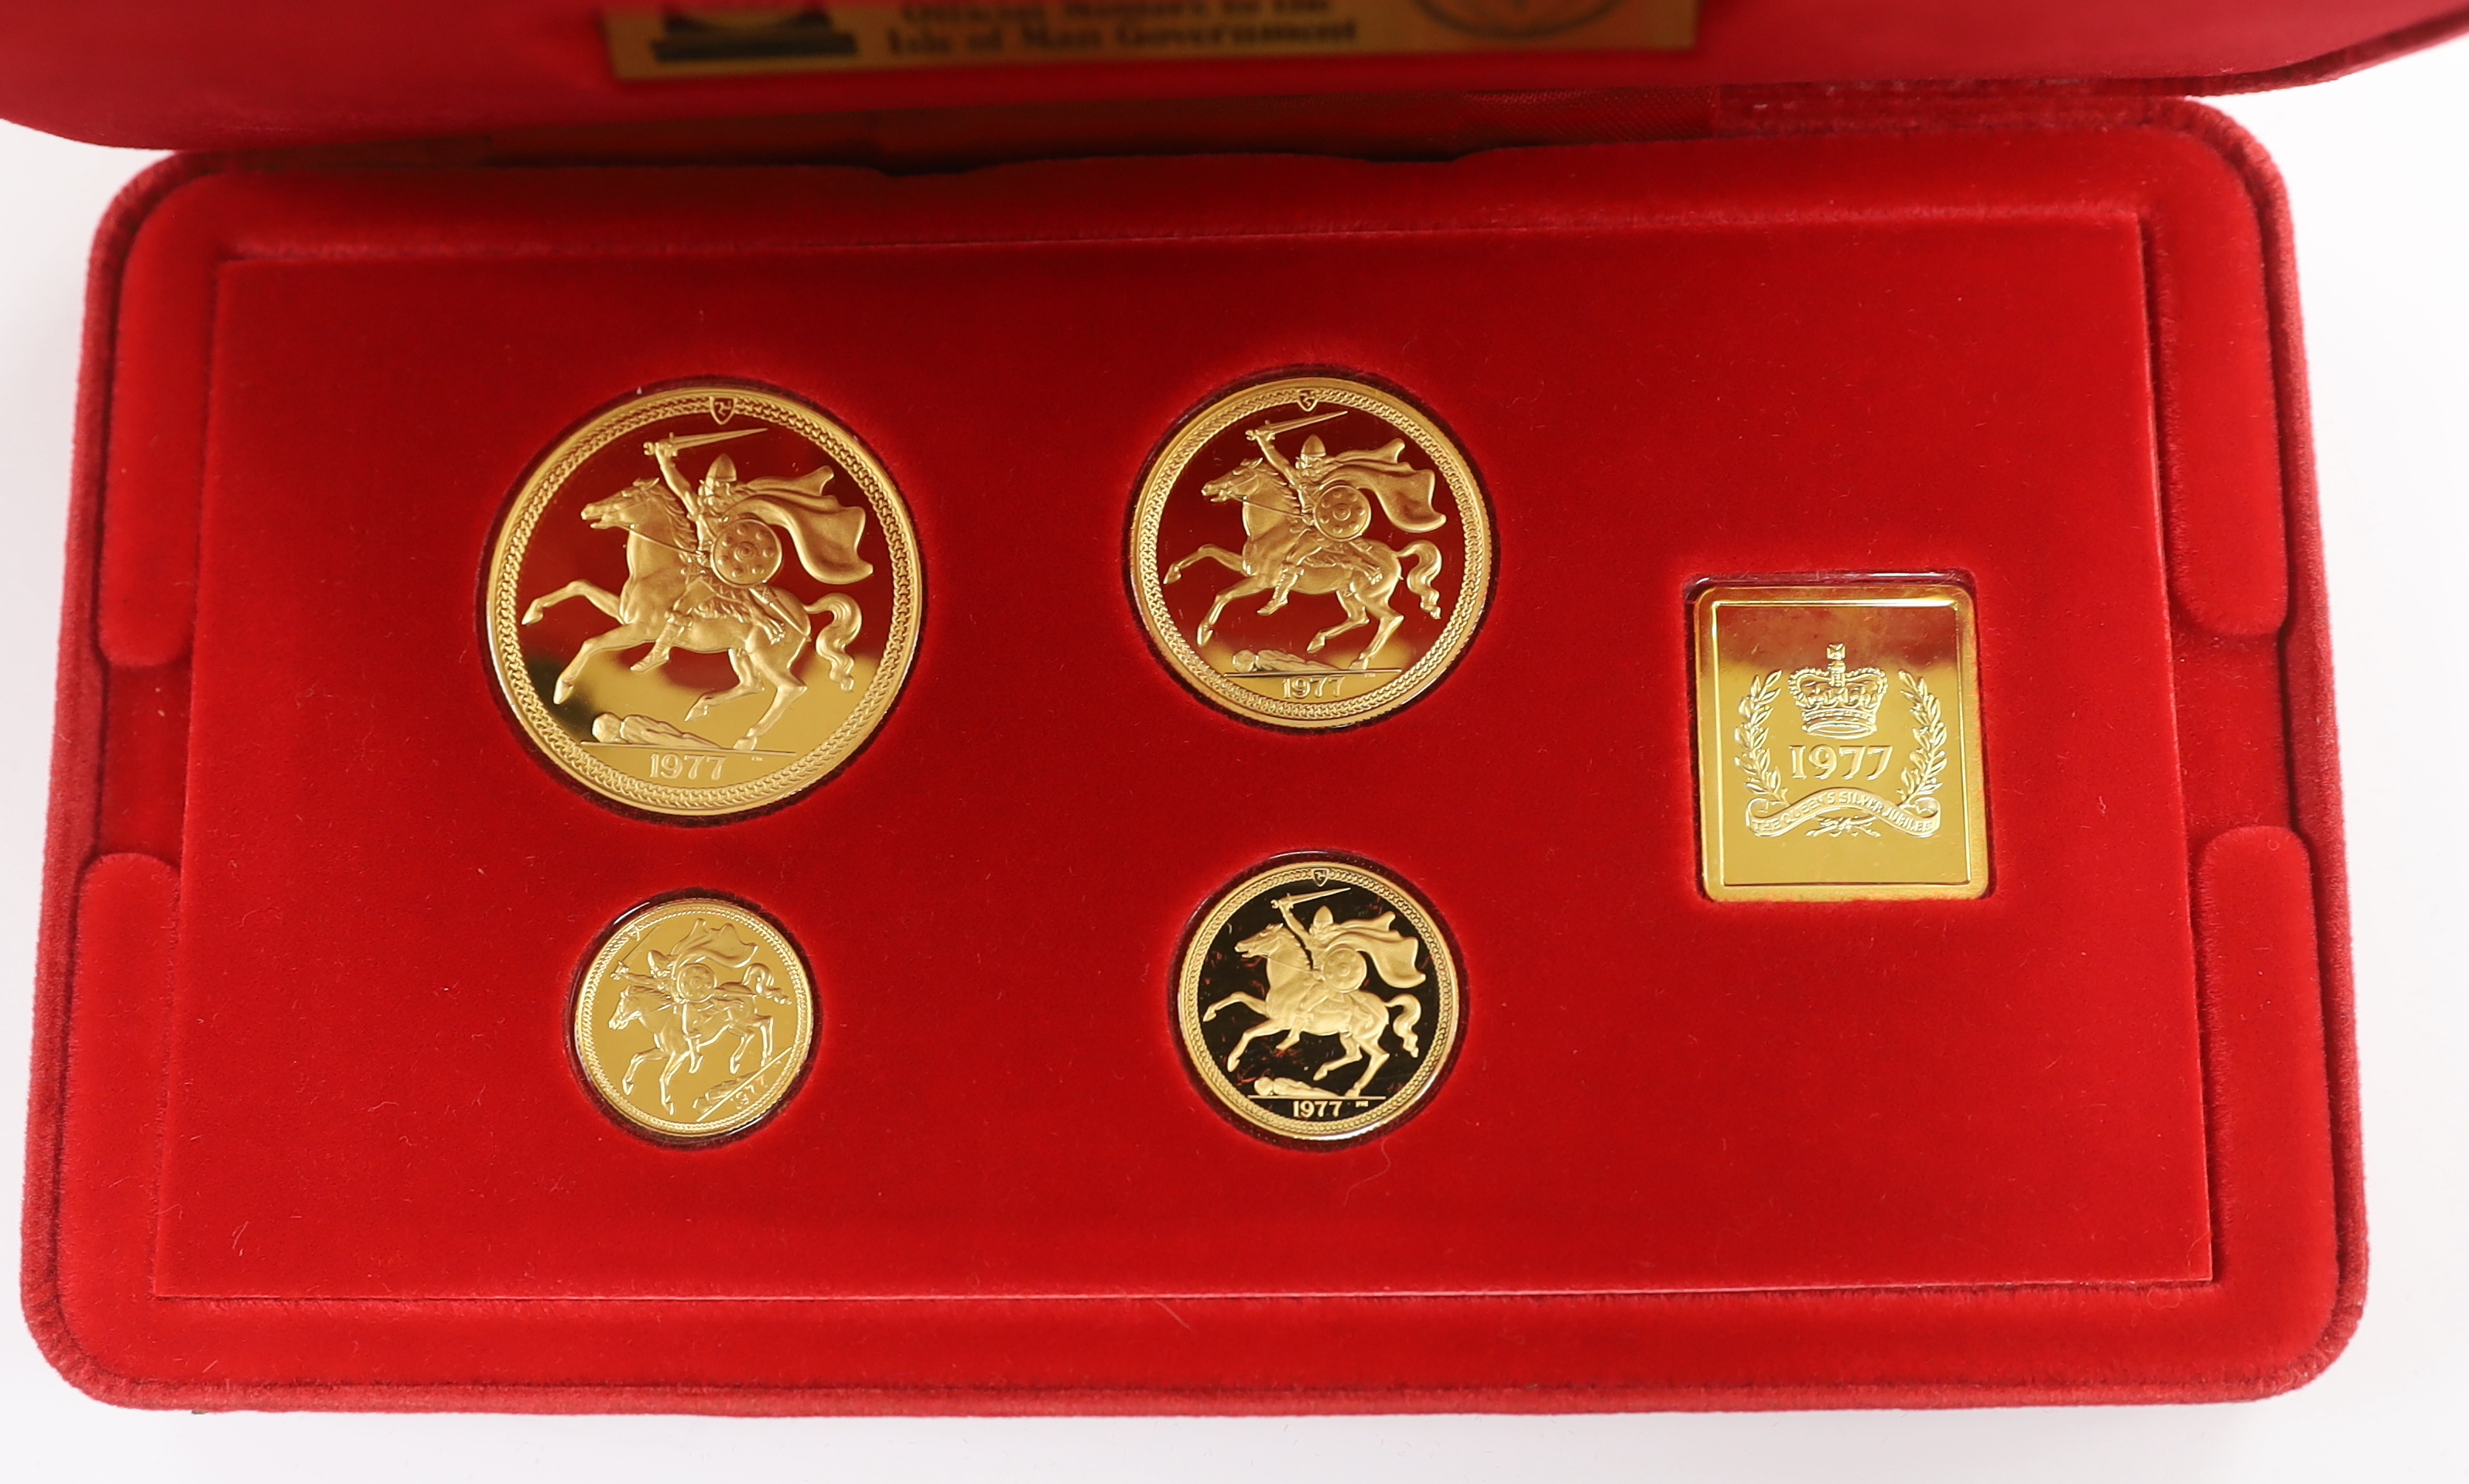 Gold coins - Isle of Man proof gold coin set, comprising half sovereign, sovereign, £2 and £5 coins, - Image 2 of 5